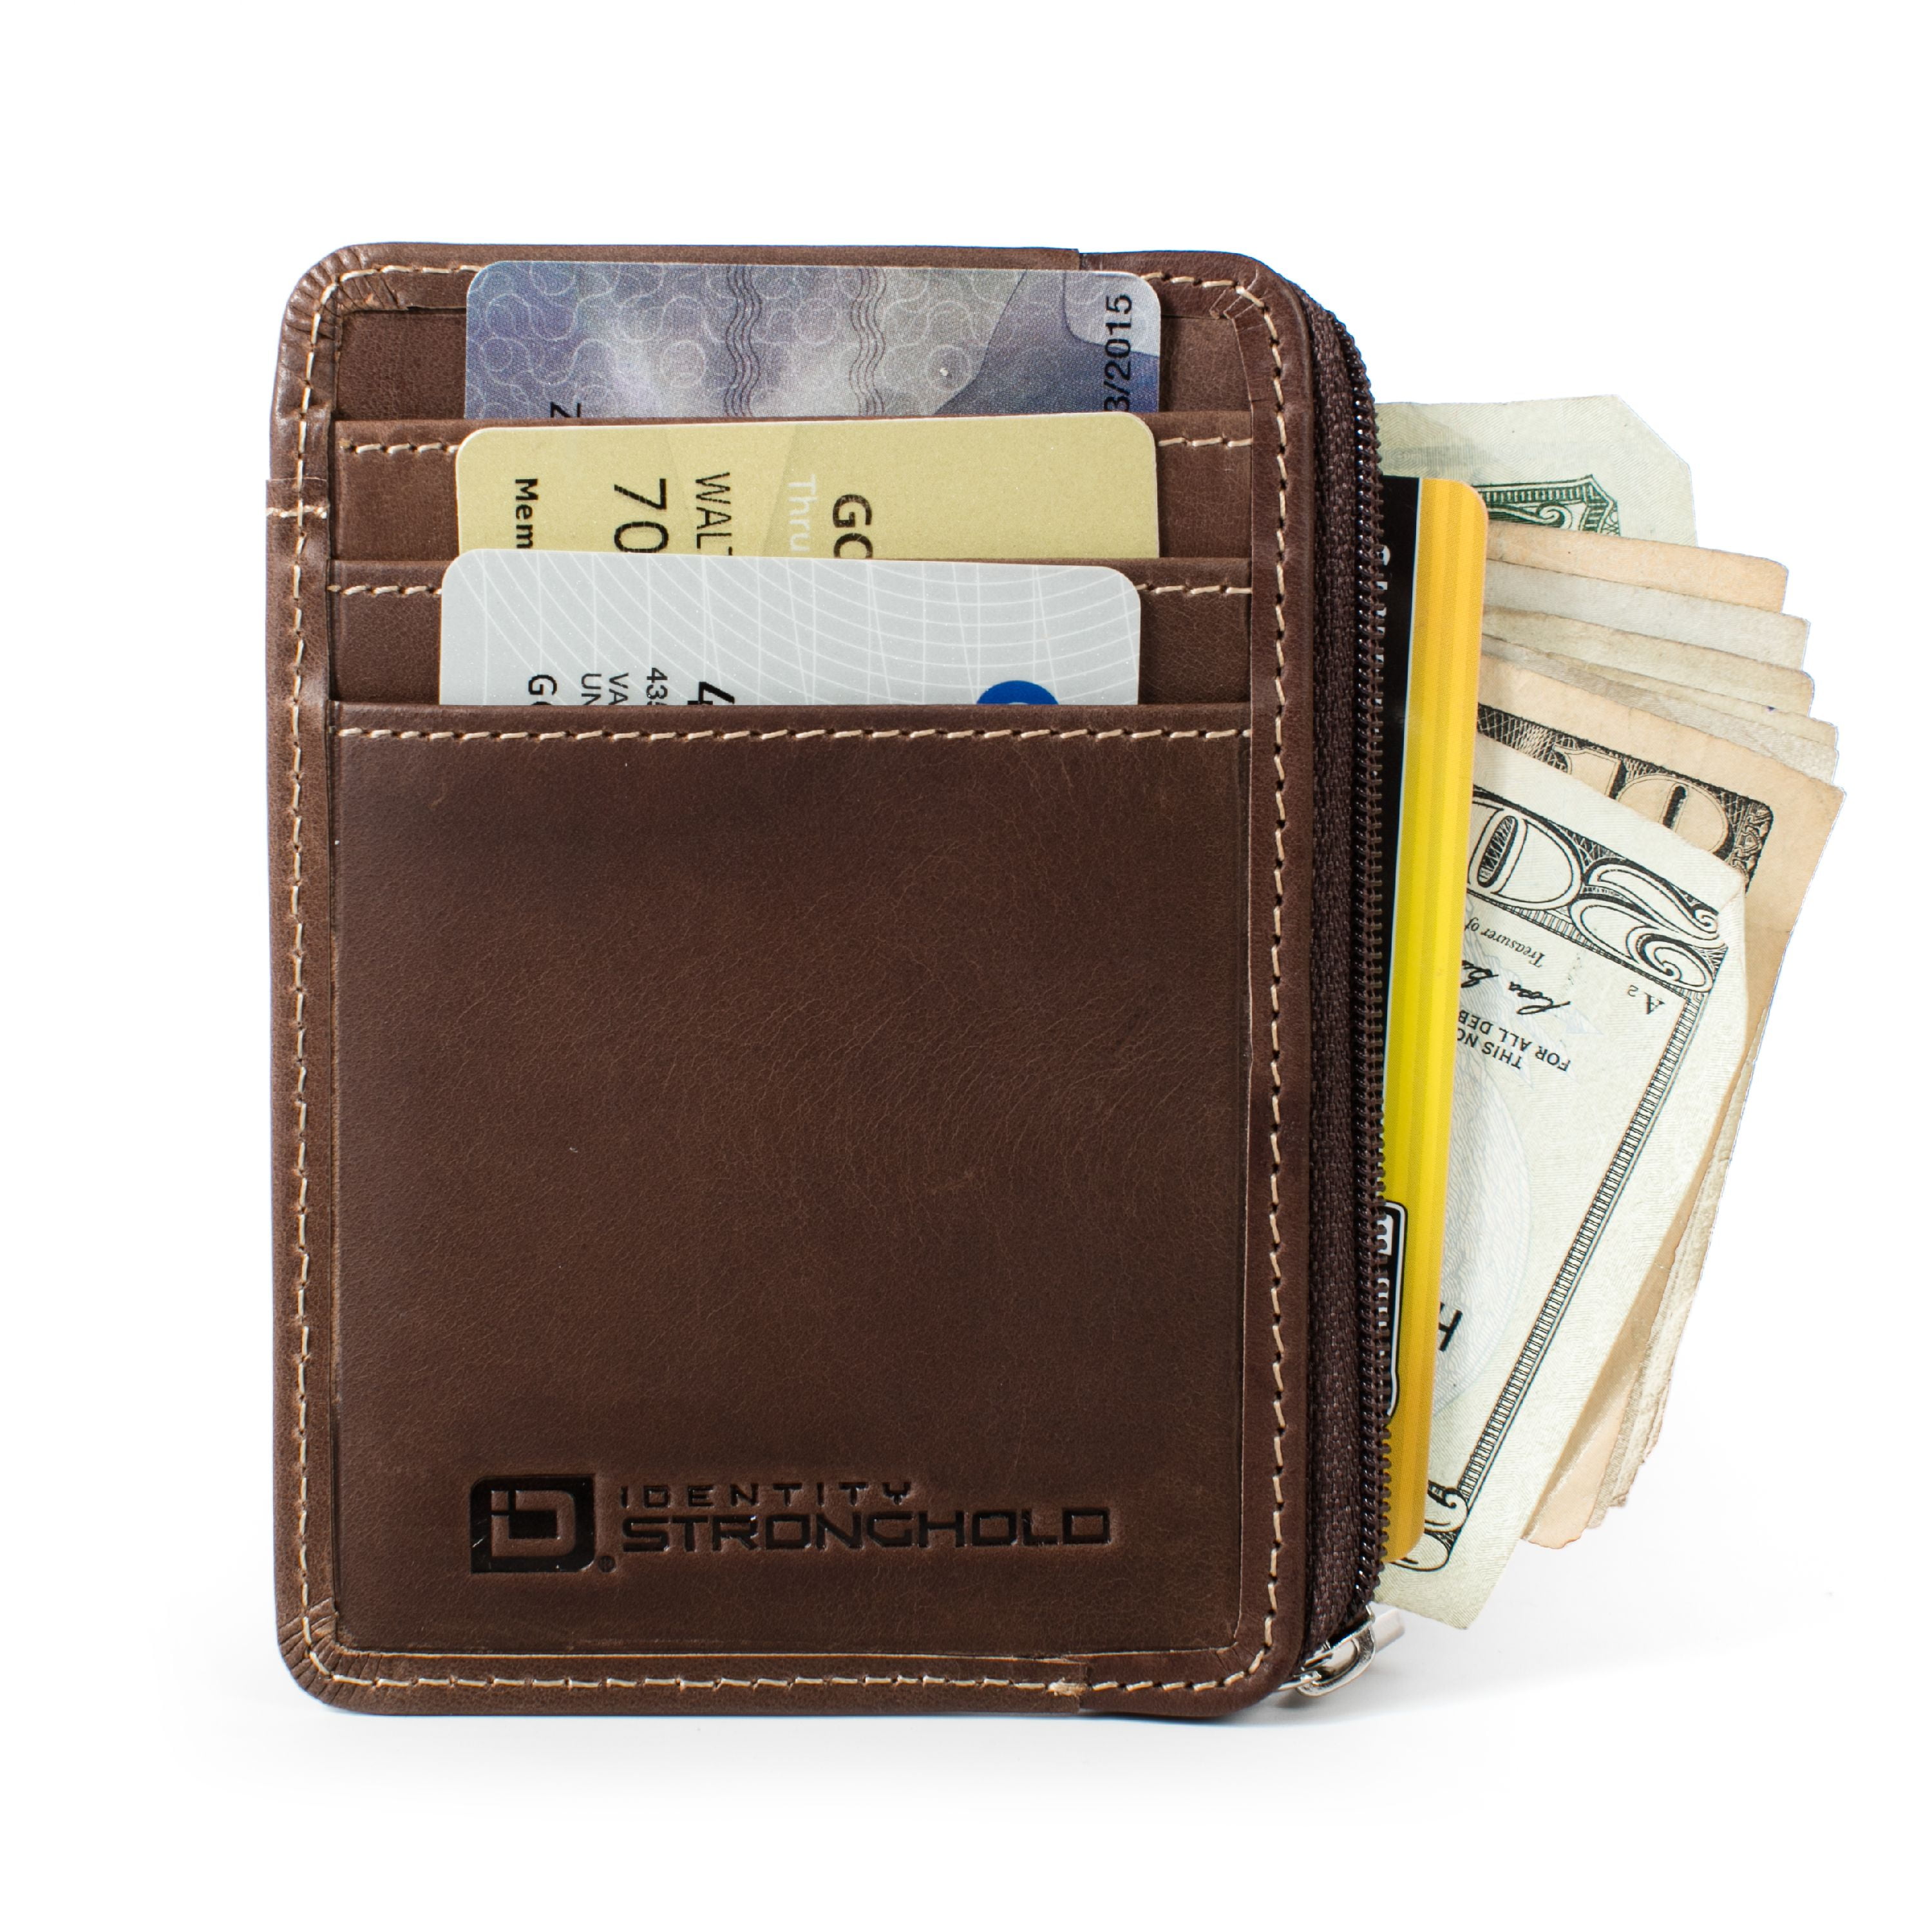 ID Stronghold - ID StrongholdRFID Wallet Mini for Men and Women ...